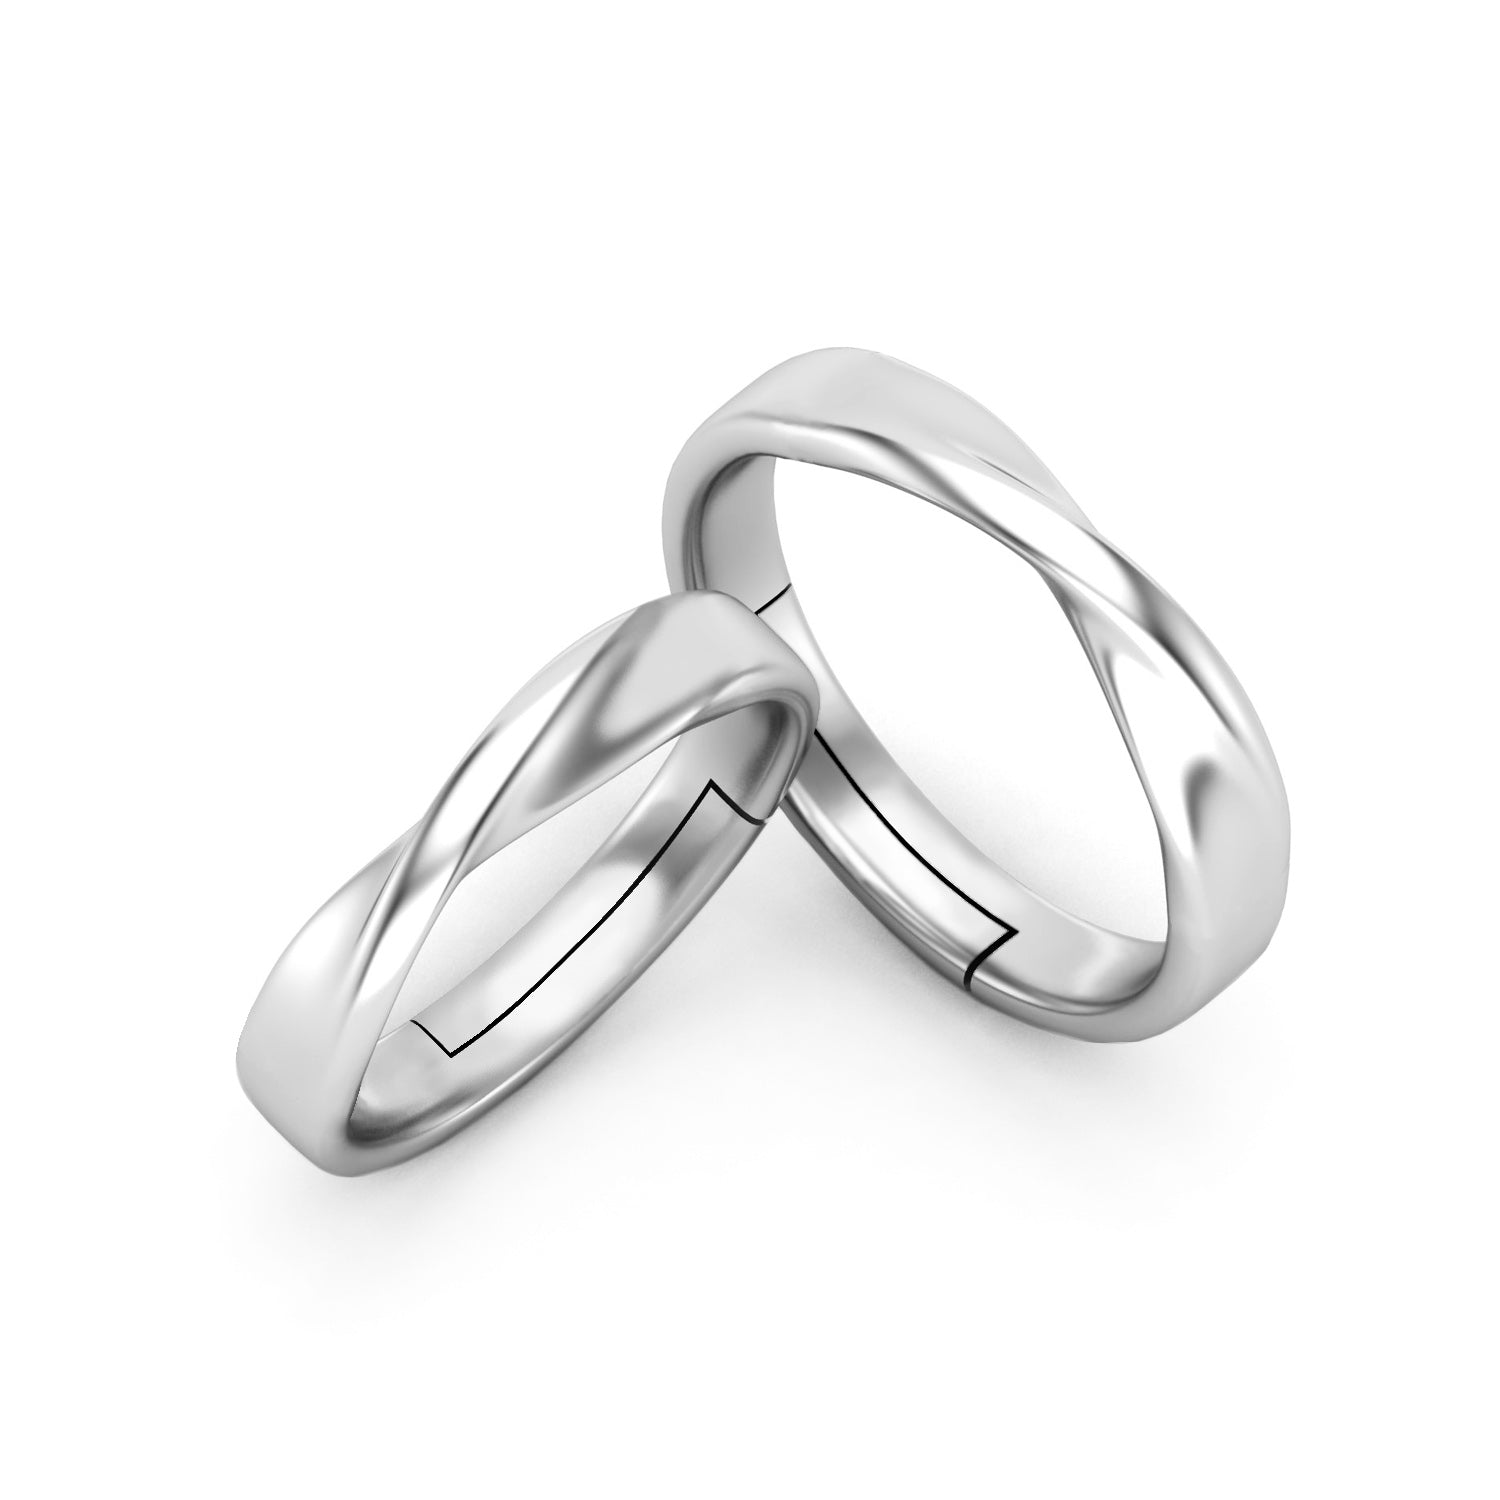 Adjustable Simple Silver Couple Ring For Men And Women, 57% OFF